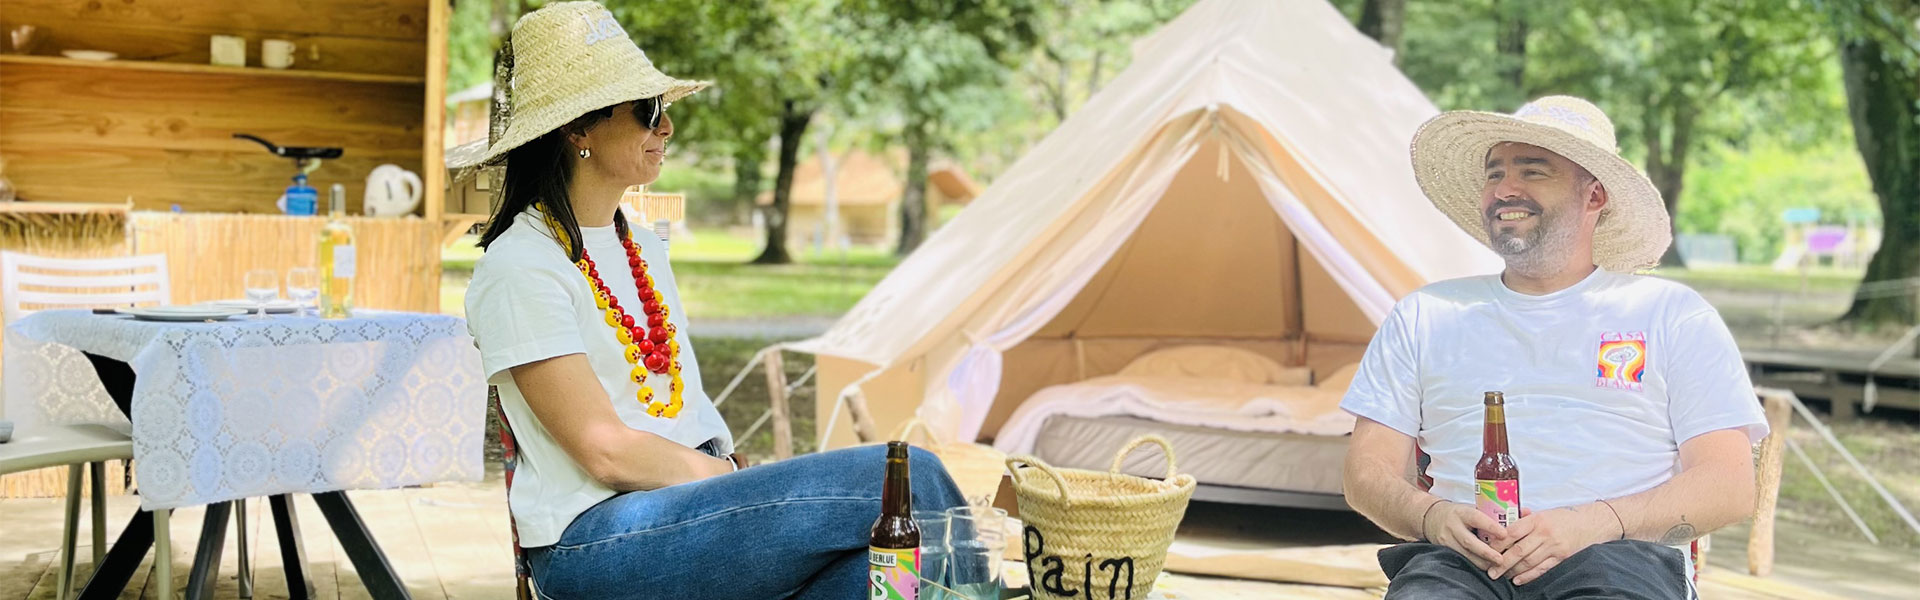 Stay in a Glamping tent in Occitania